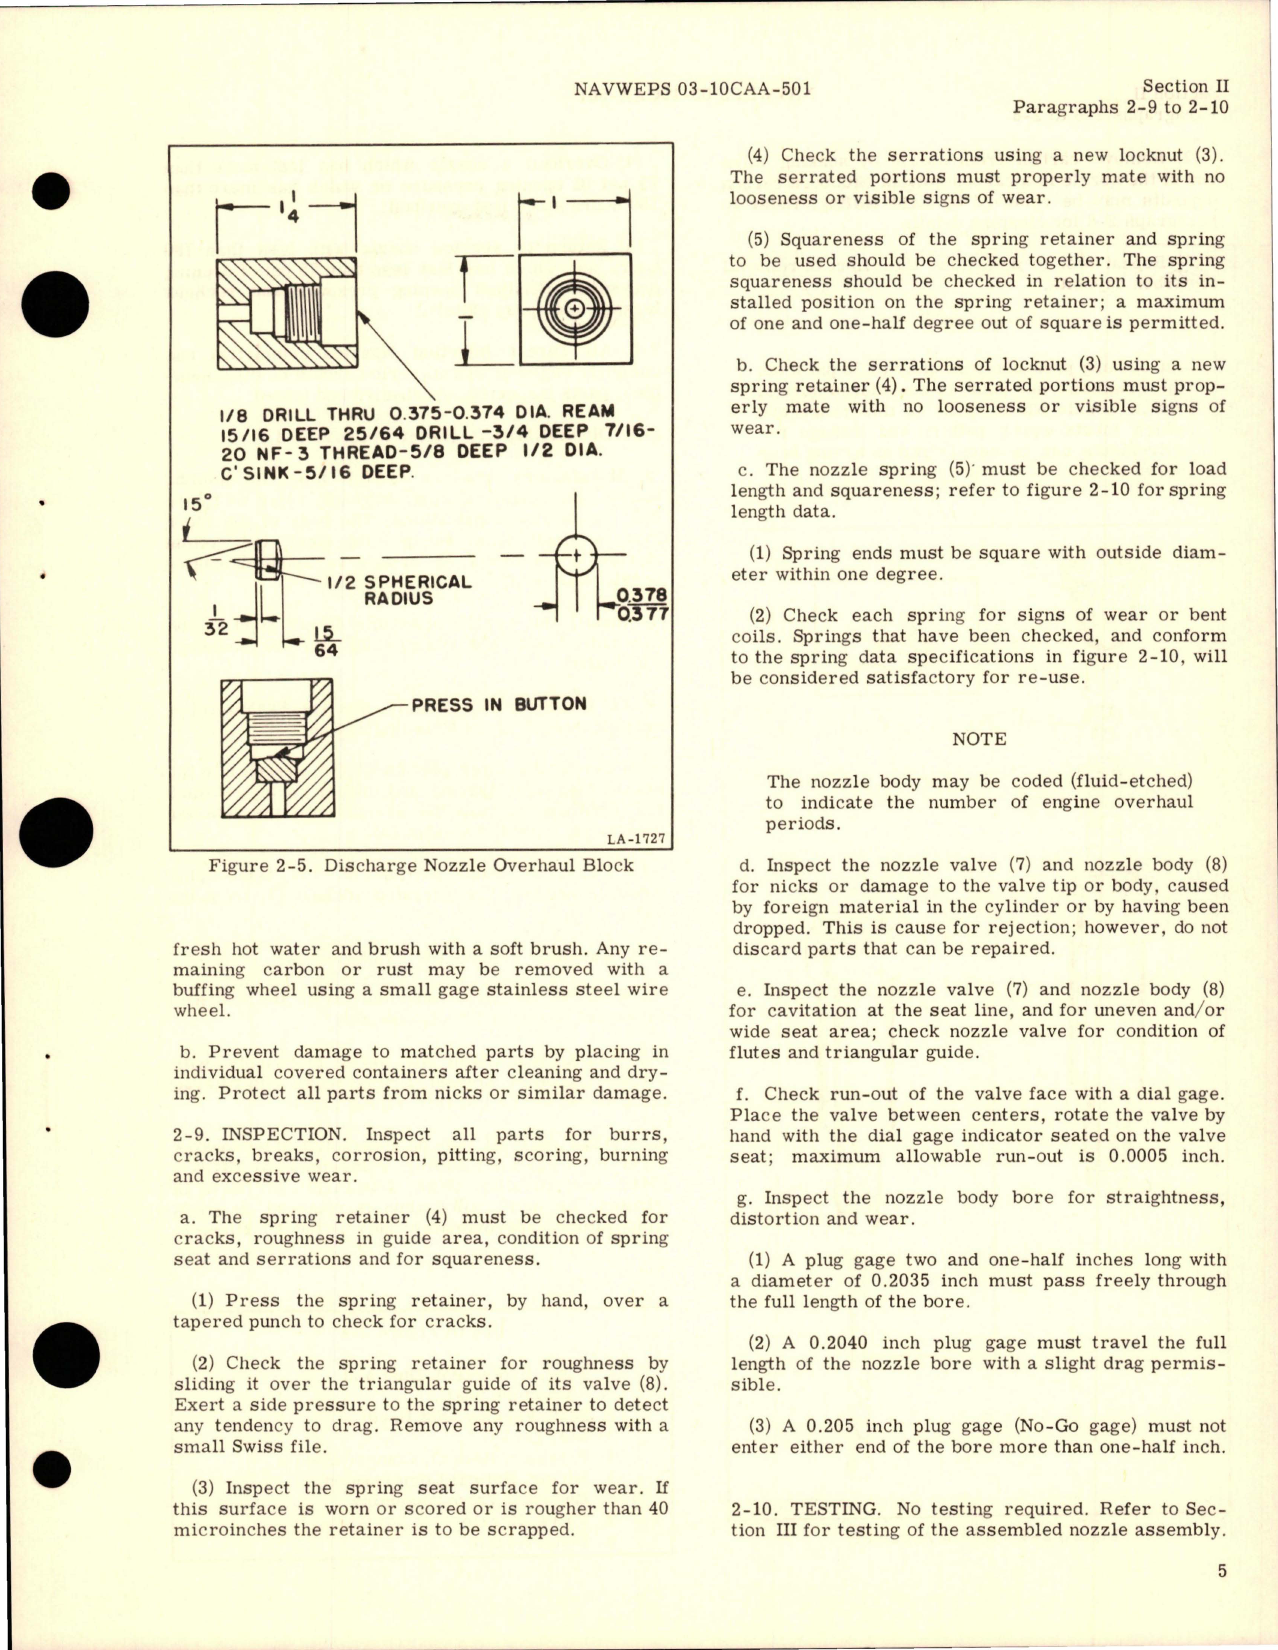 Sample page 9 from AirCorps Library document: Overhaul Instructions for Direct Fuel Injection Nozzles 